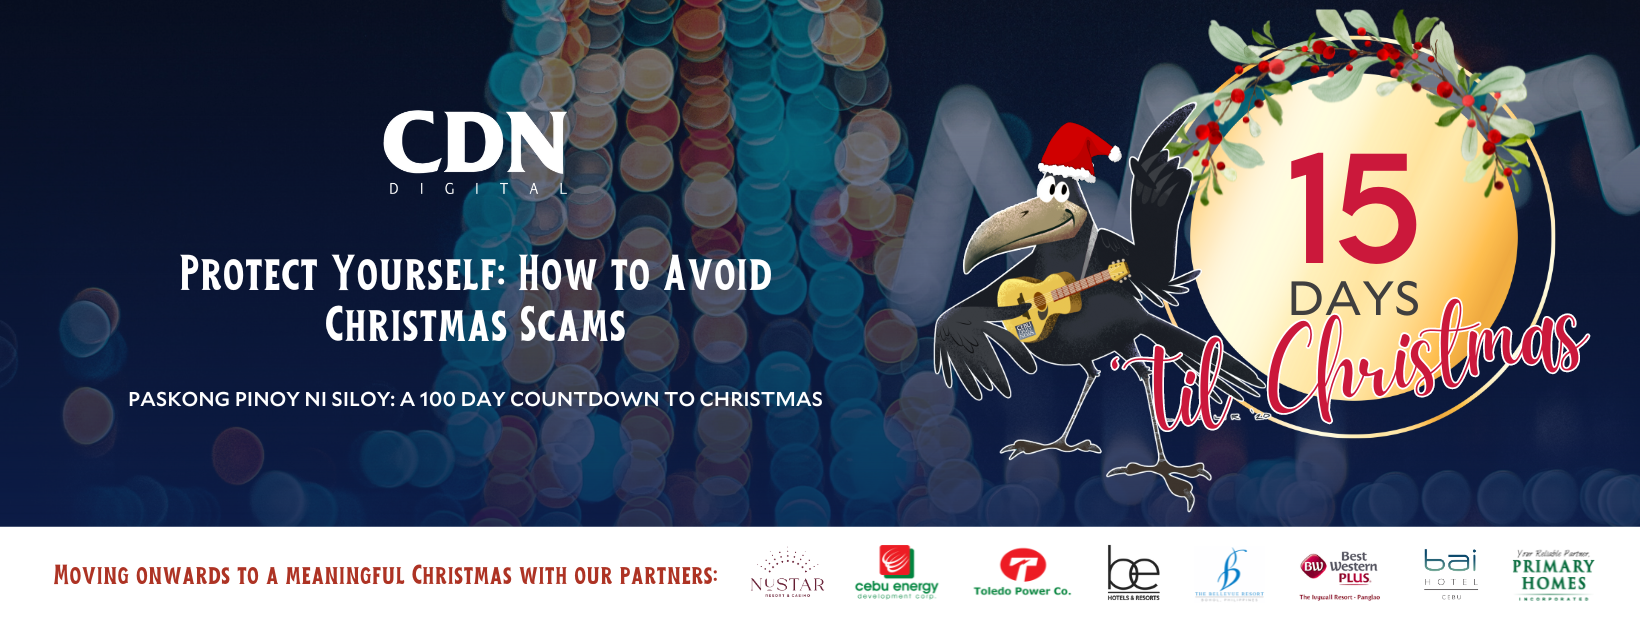 Protect Yourself: How to Avoid Christmas Scams